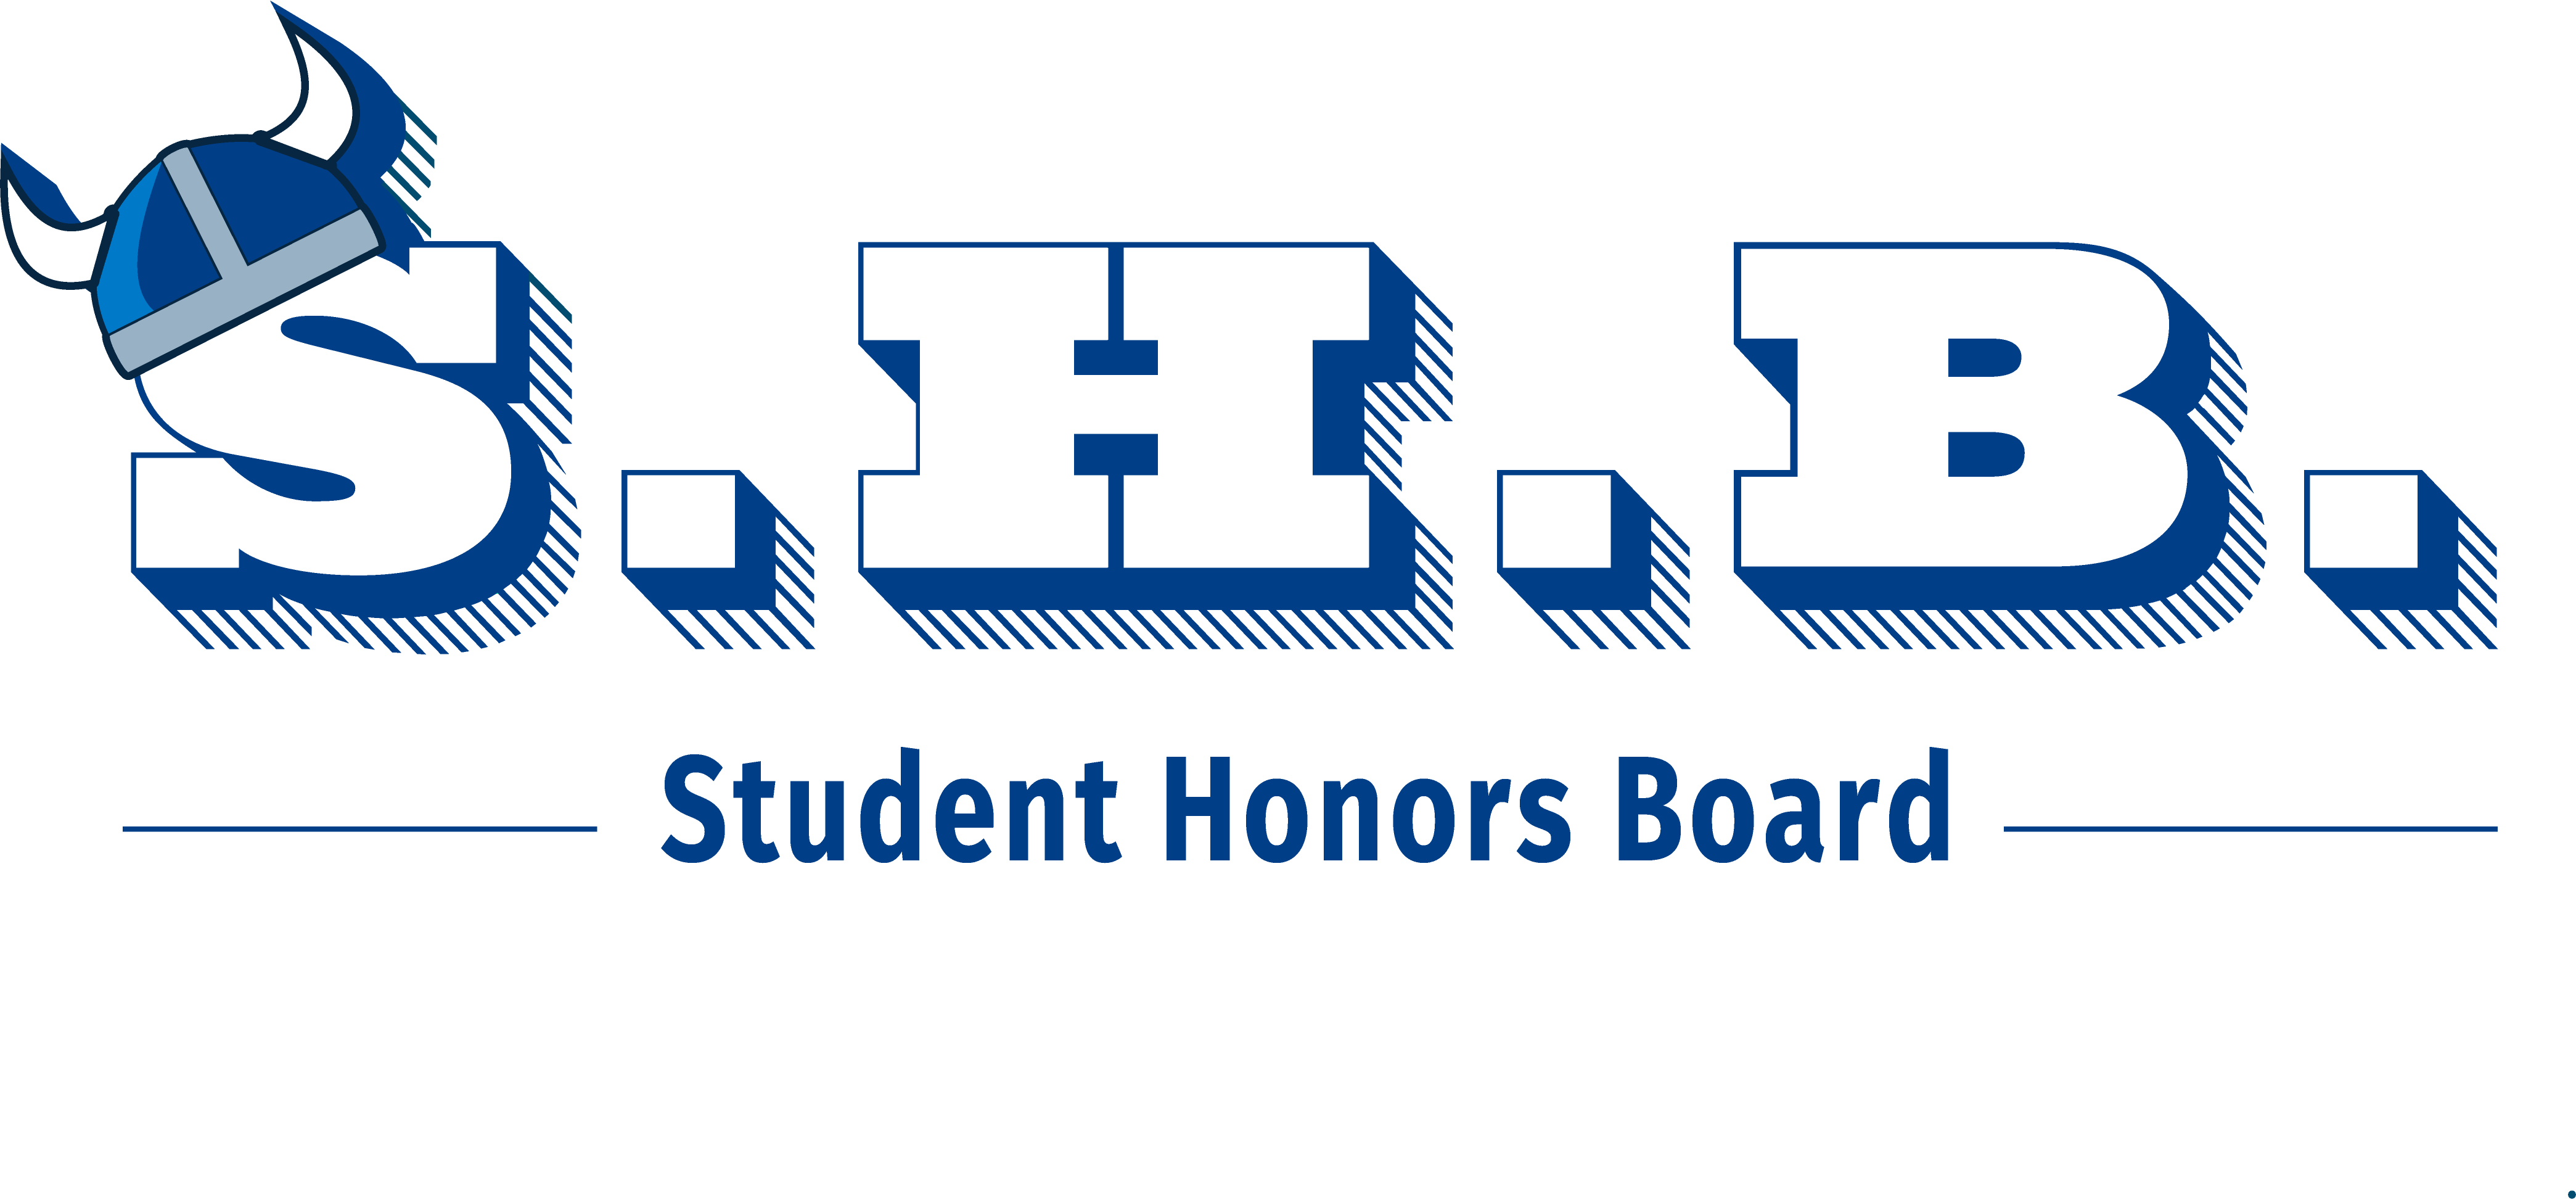 Student Honors Board logo: S.H.B. with a little viking hat on the S.